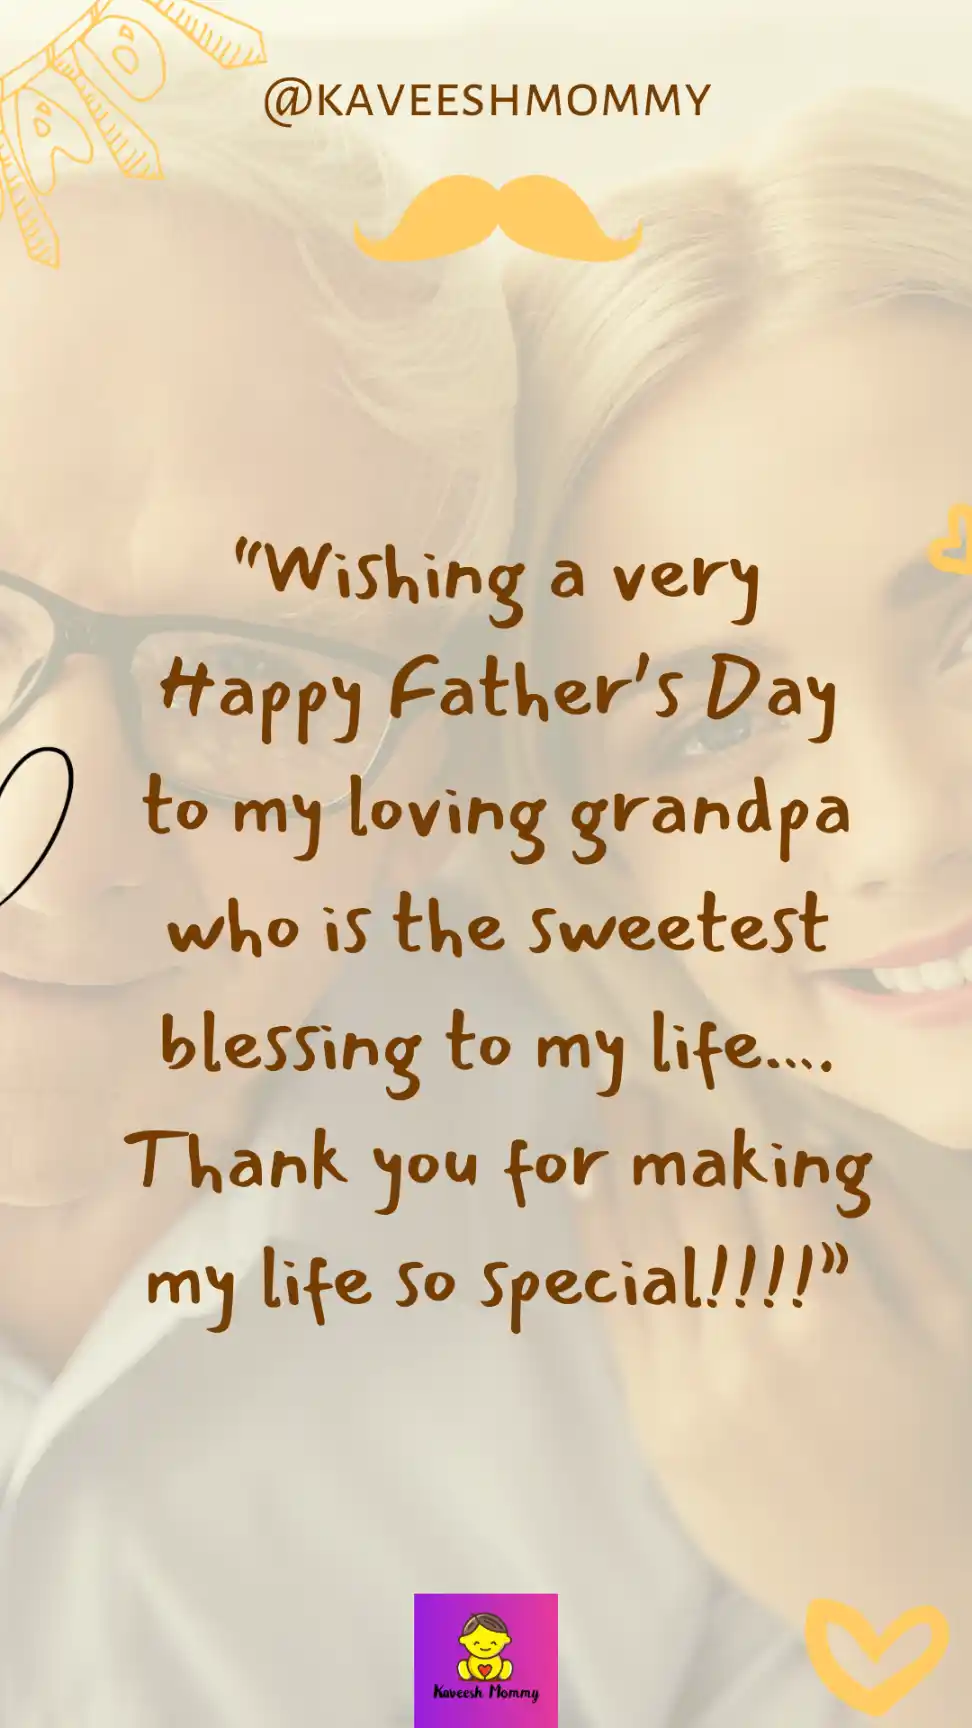 fathers day message to grandpa from -KAVEESH MOMMY grandson